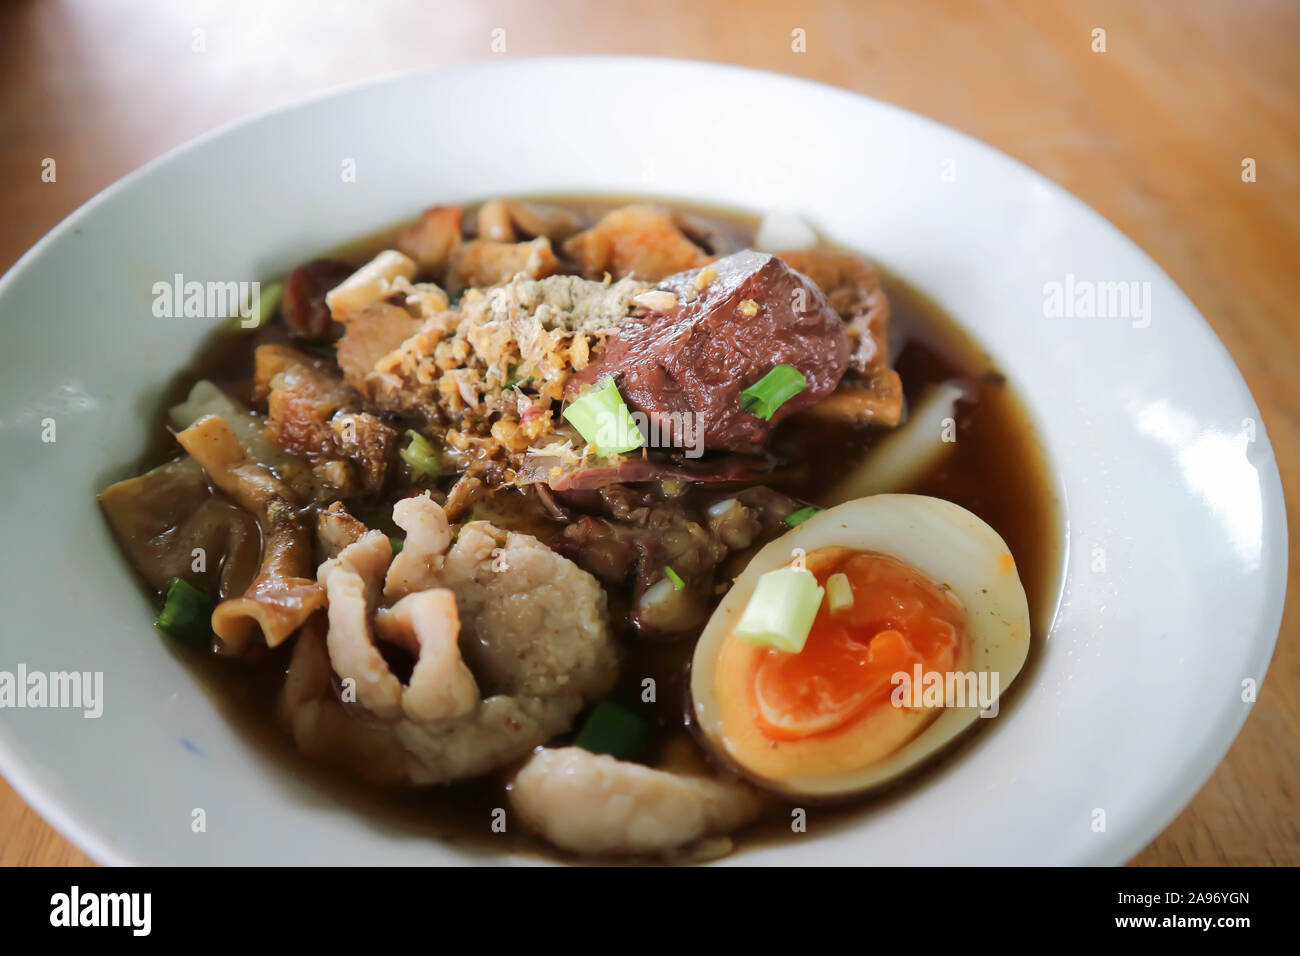 noodle, Chinese noodle or pork noodle Stock Photo